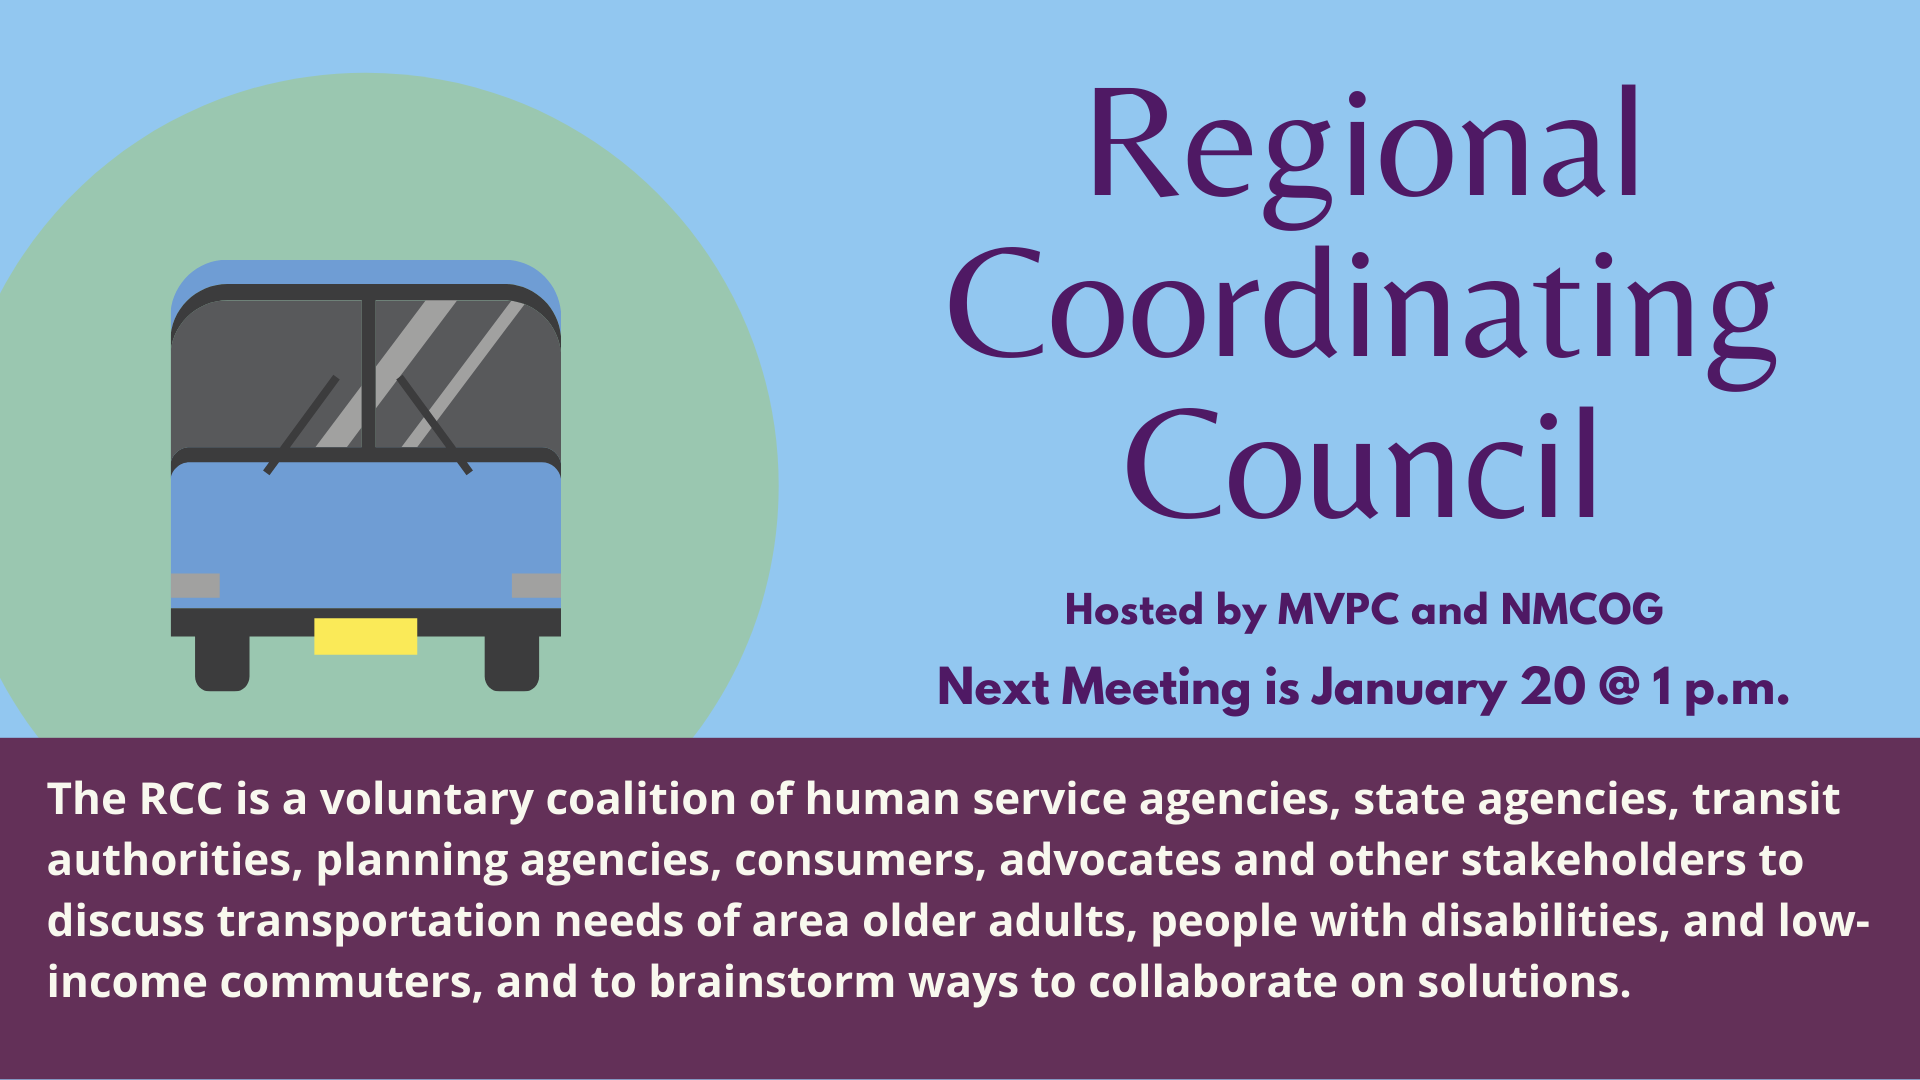 RCC is meeting January 20, 2022 at 1 pm